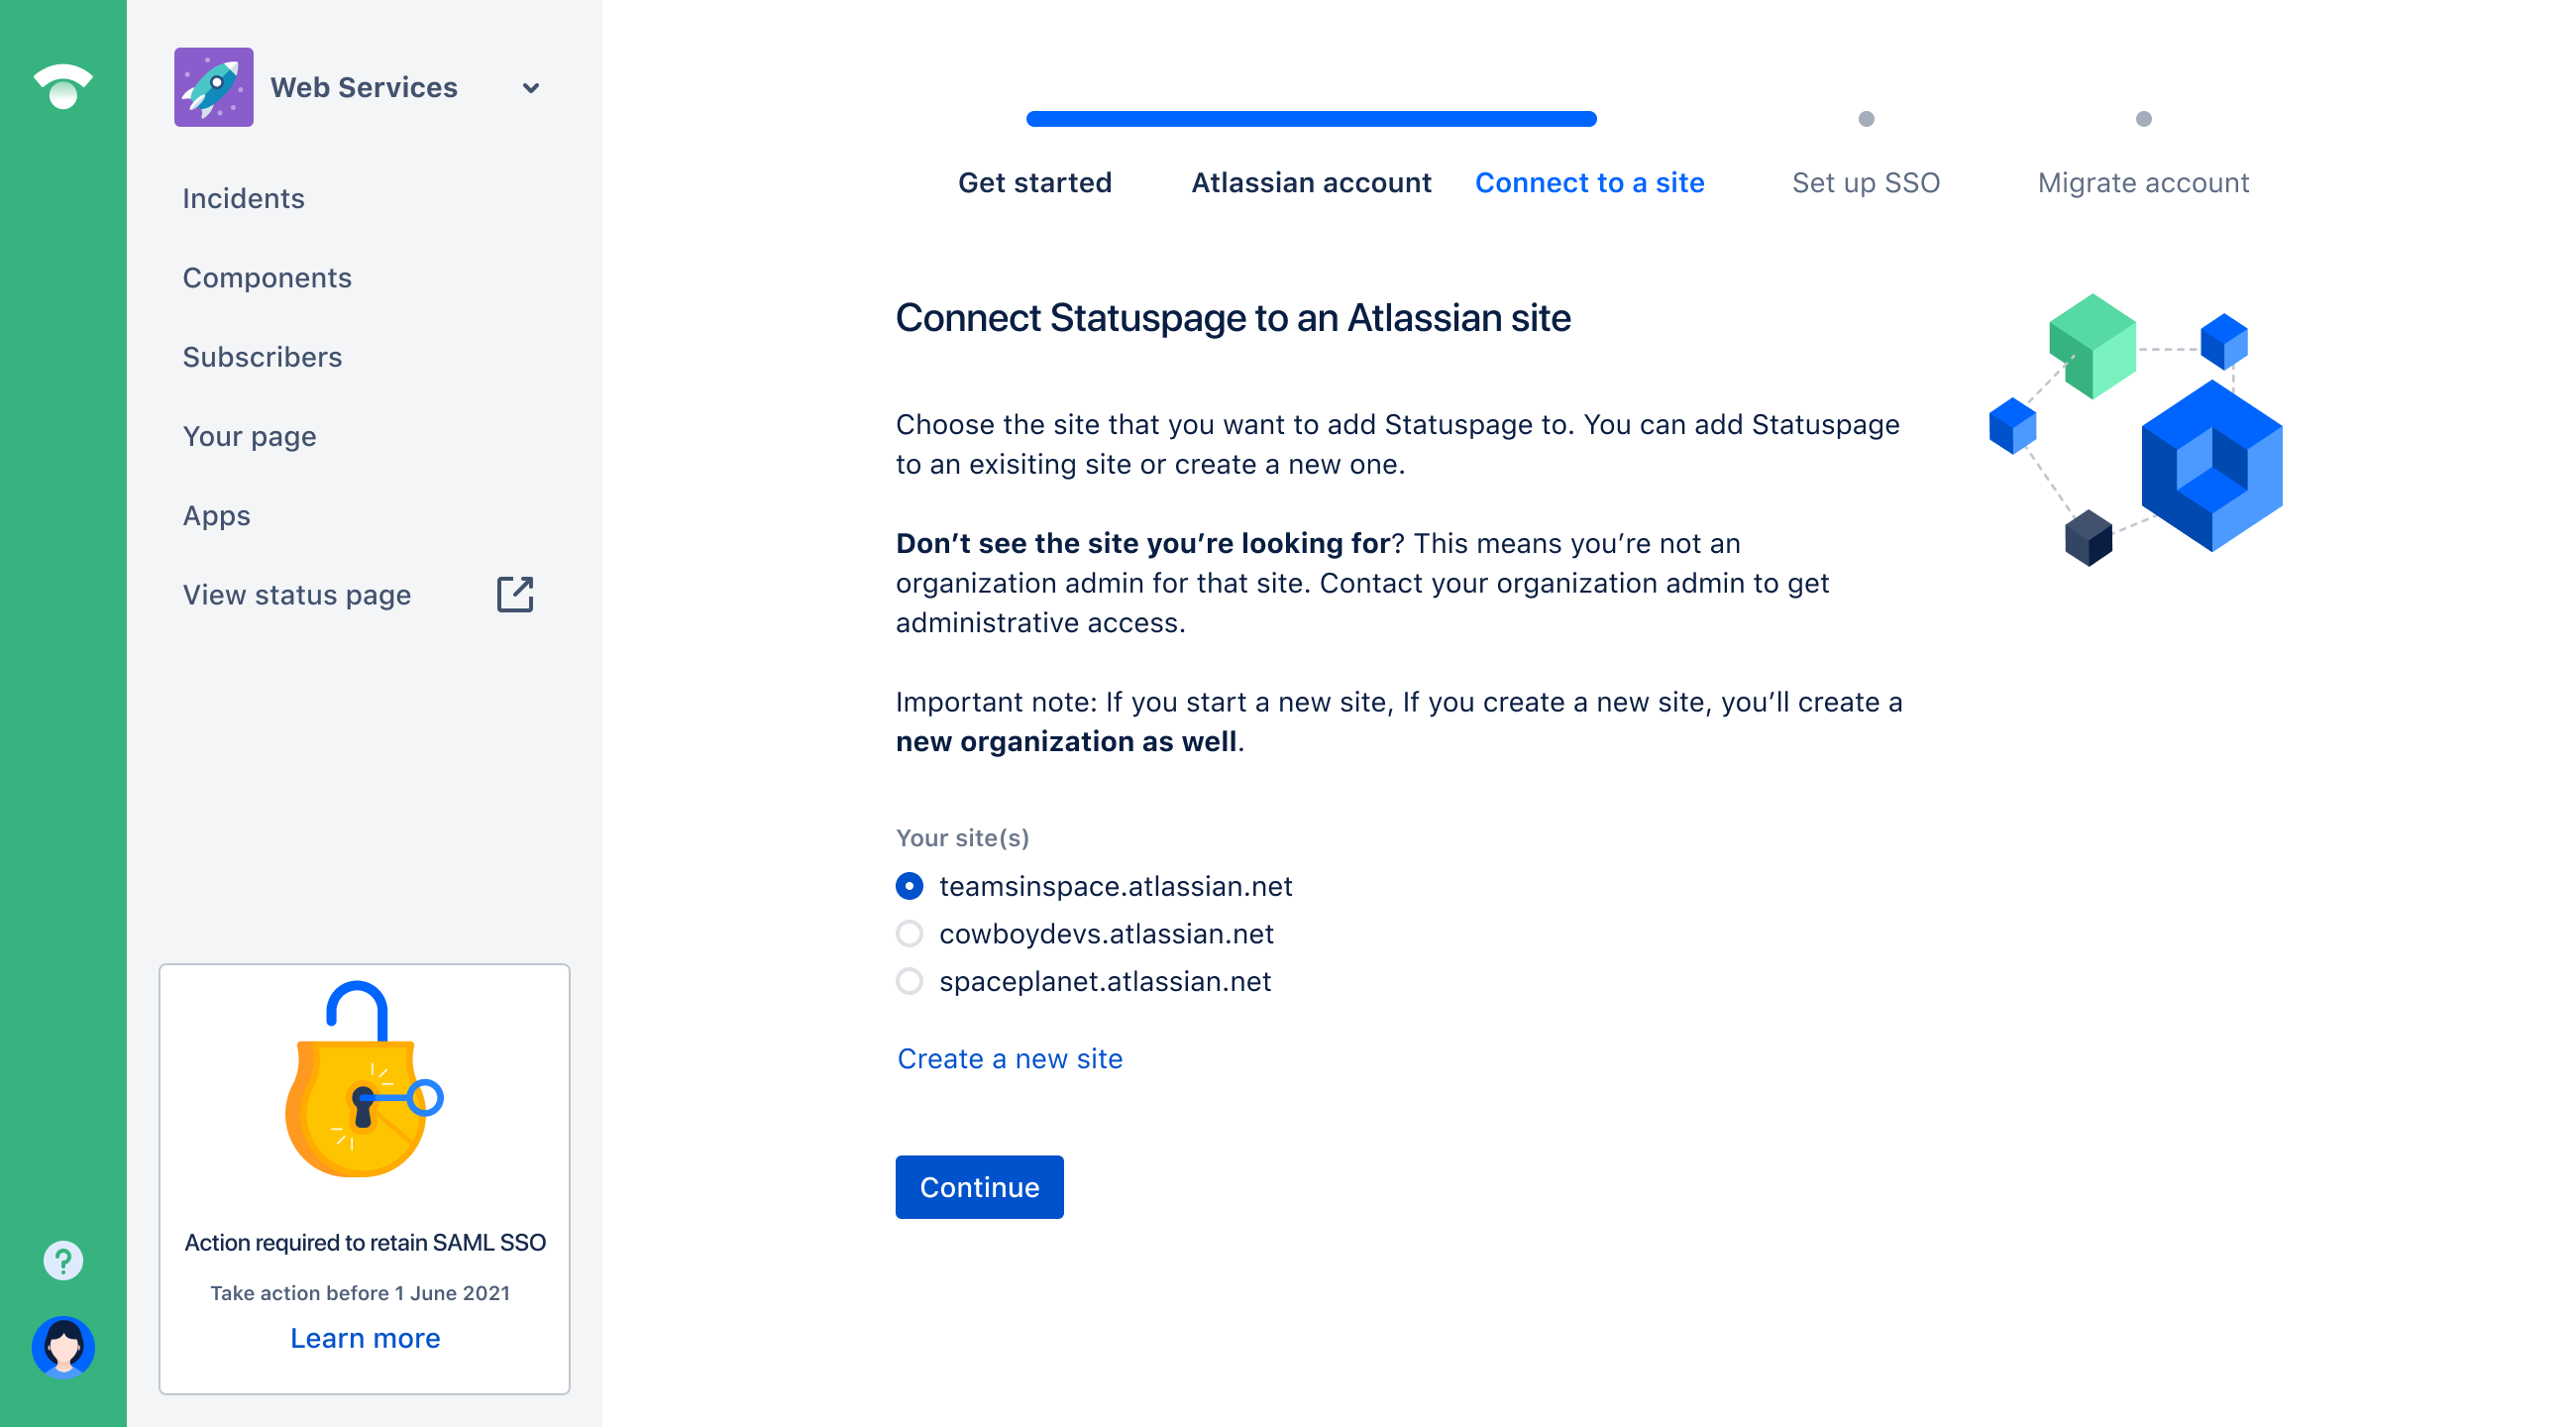 Shows the step of migration to connect Statuspage to an Atlassian site